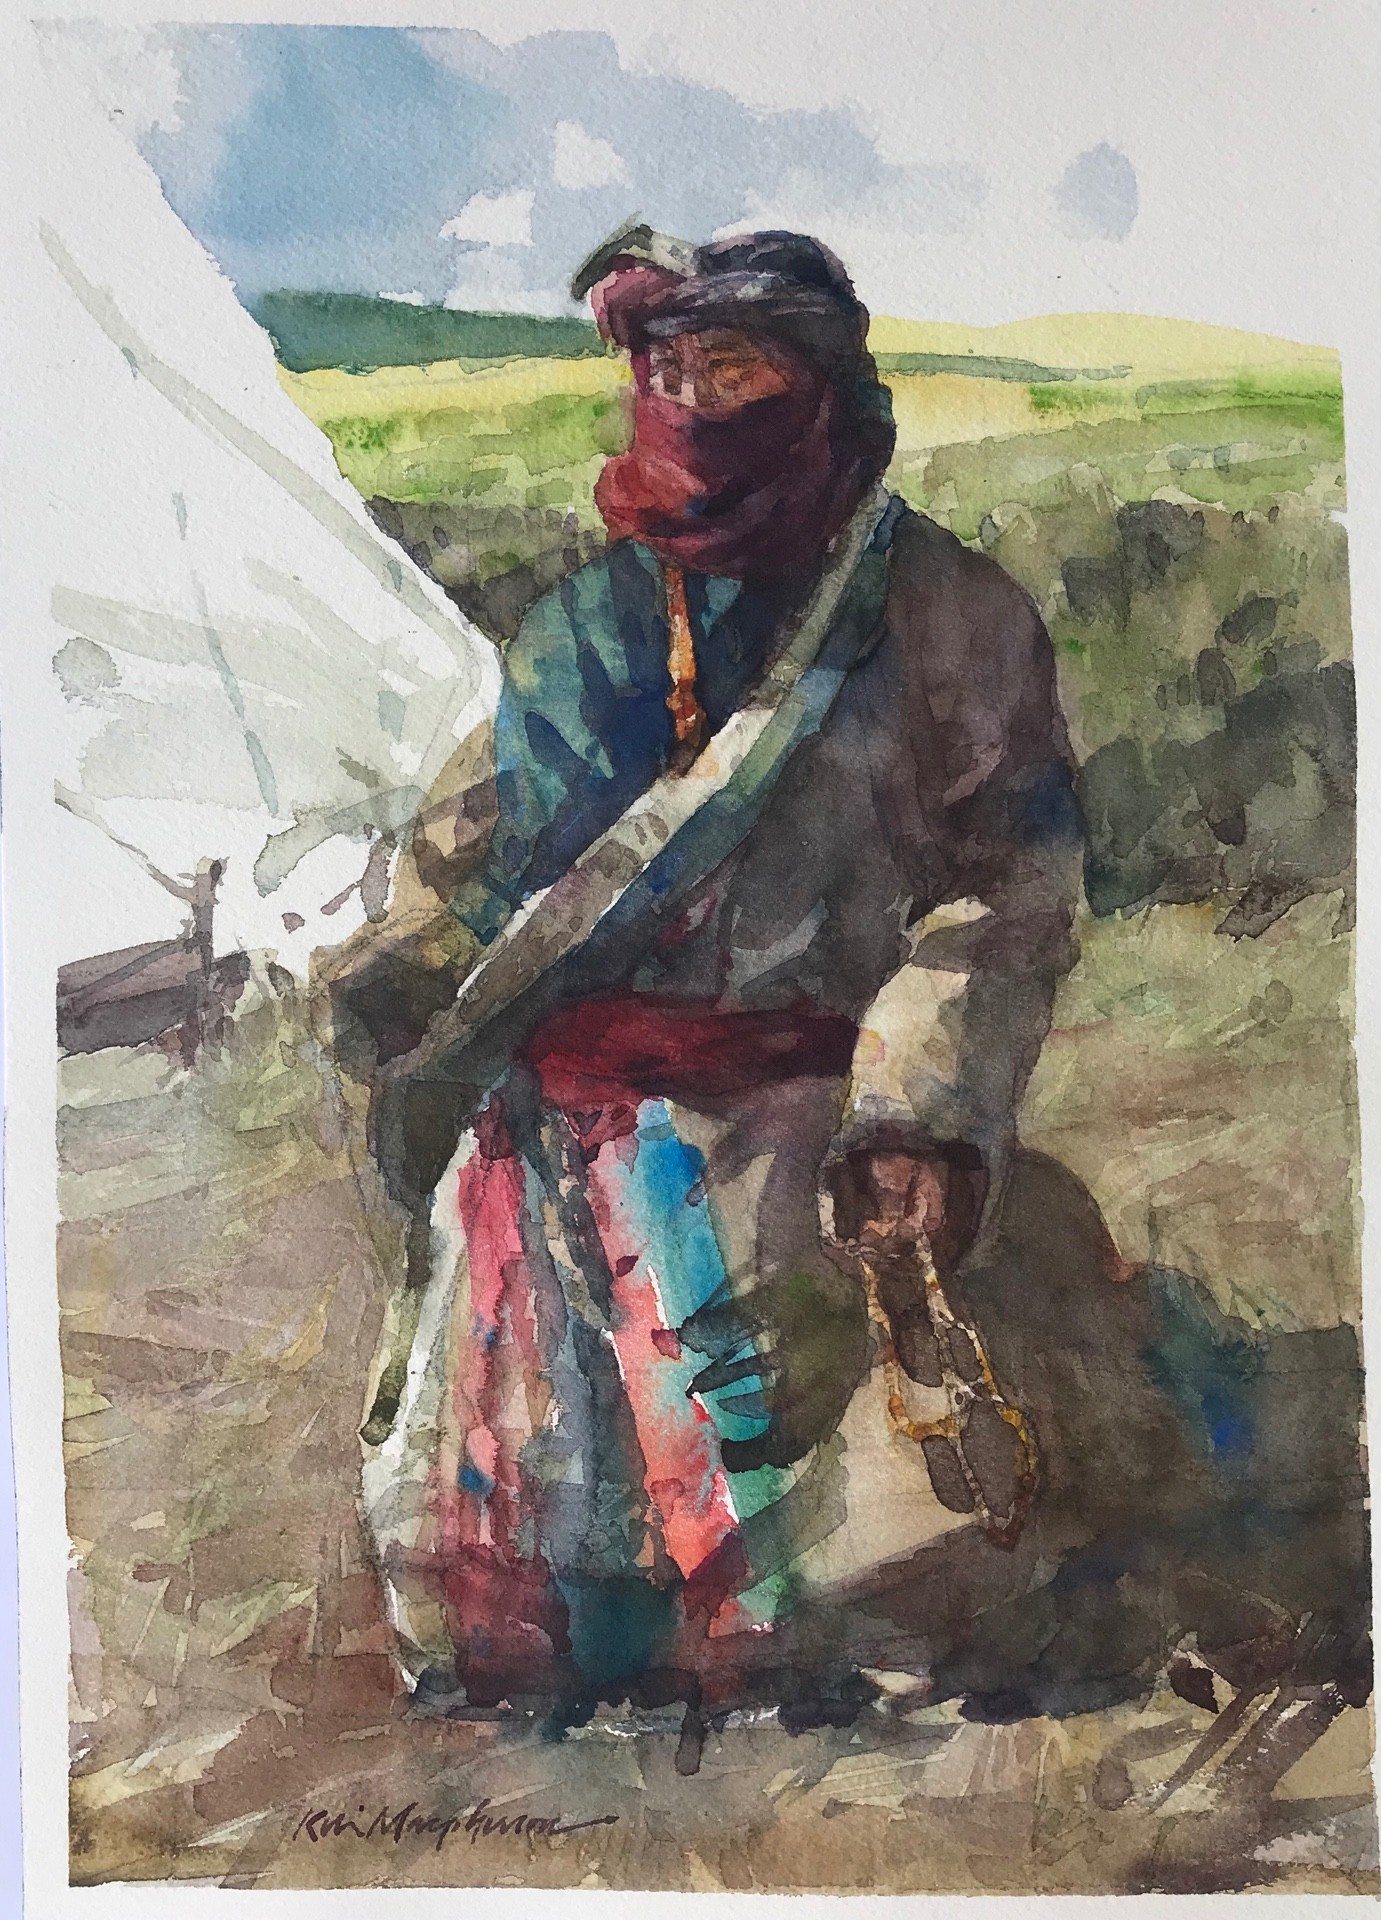 Kevin Macpherson, “Xia He Nomad,” Watercolor, 13 x 9 in.